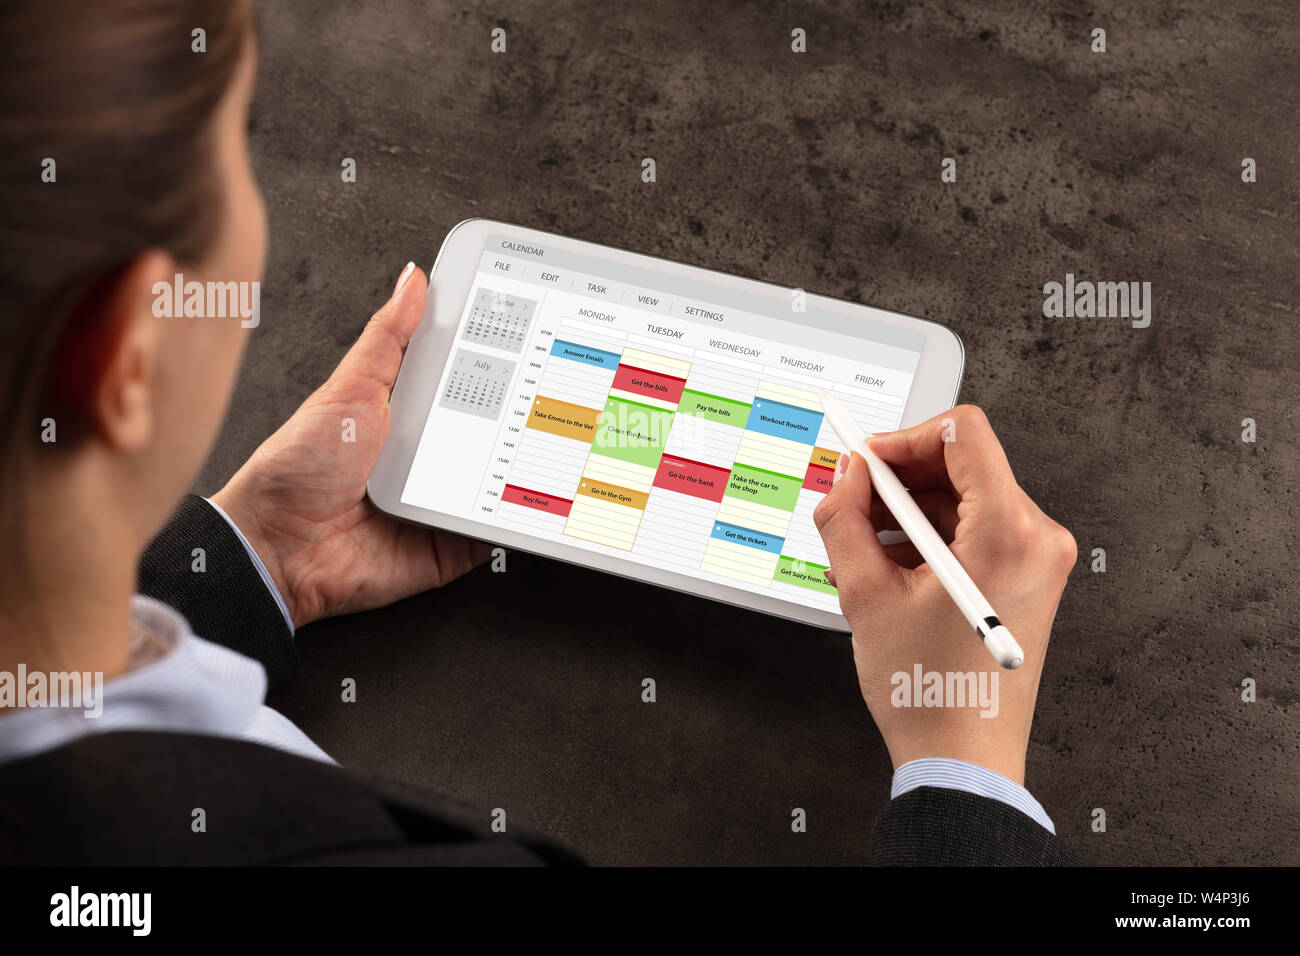 Business woman schedule her weekly program on tablet Stock Photo